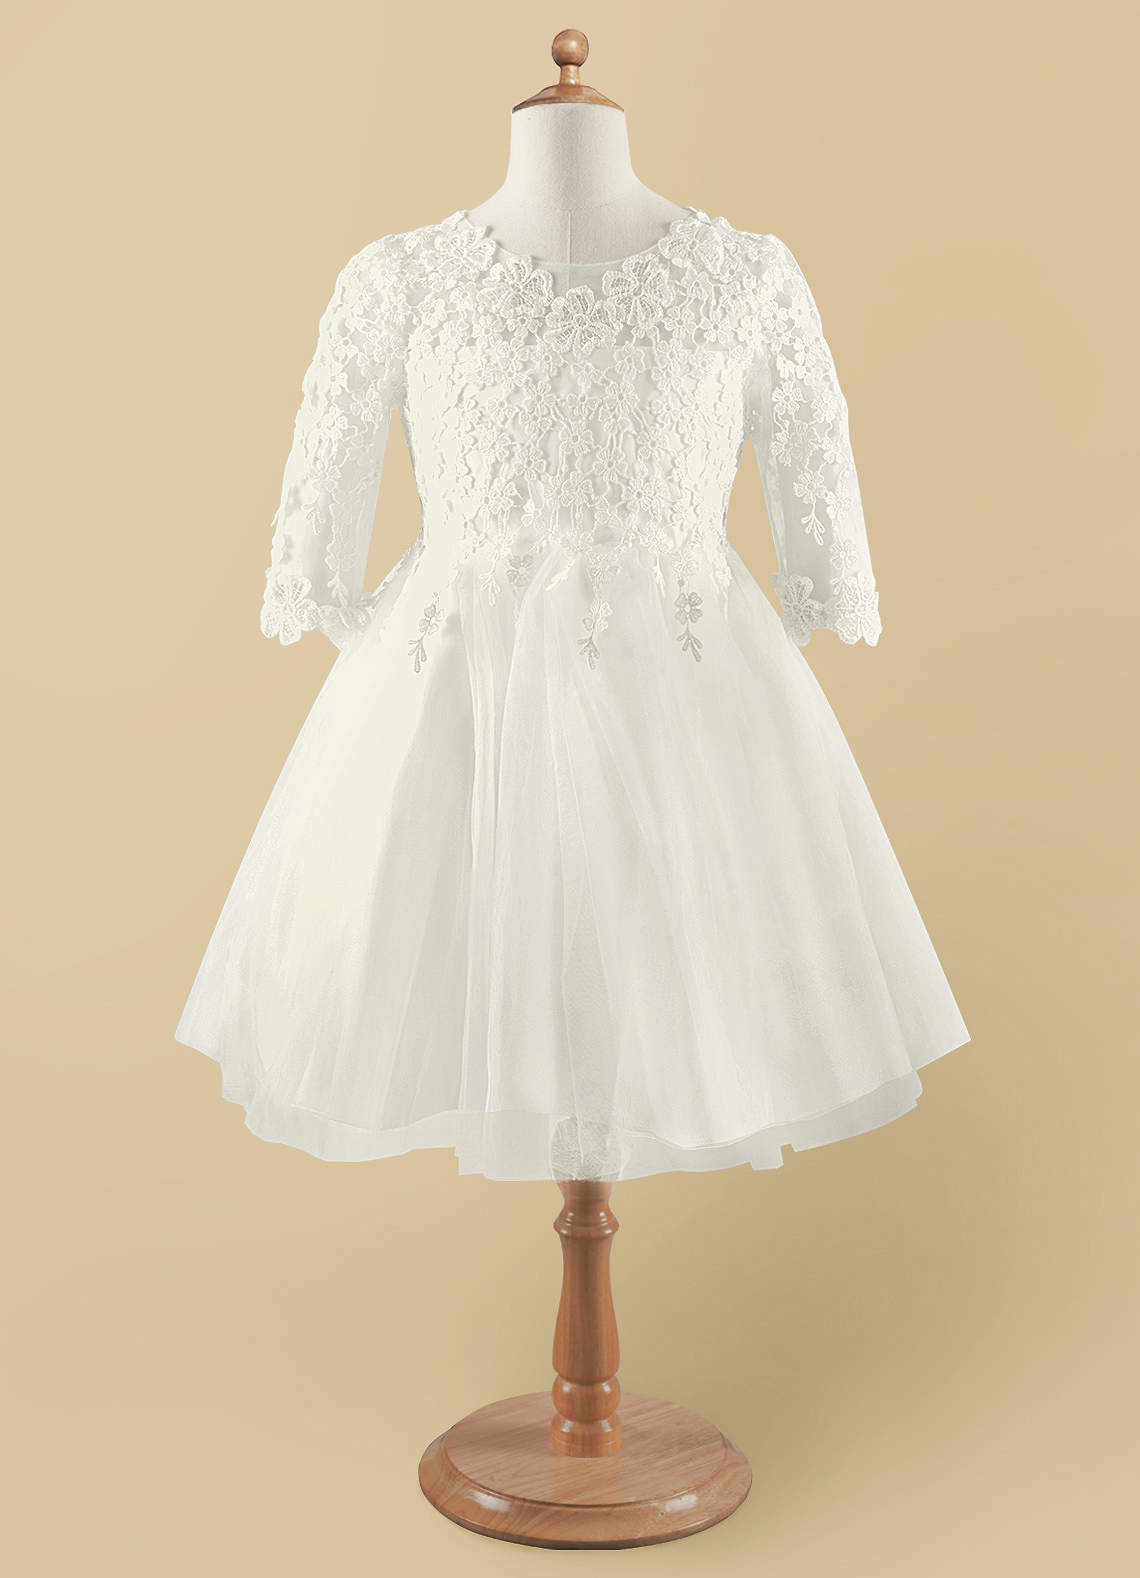 Azazie lindsay Flower Girl Dresses Ball-Gown Lace Tulle Knee-Length Dress image1